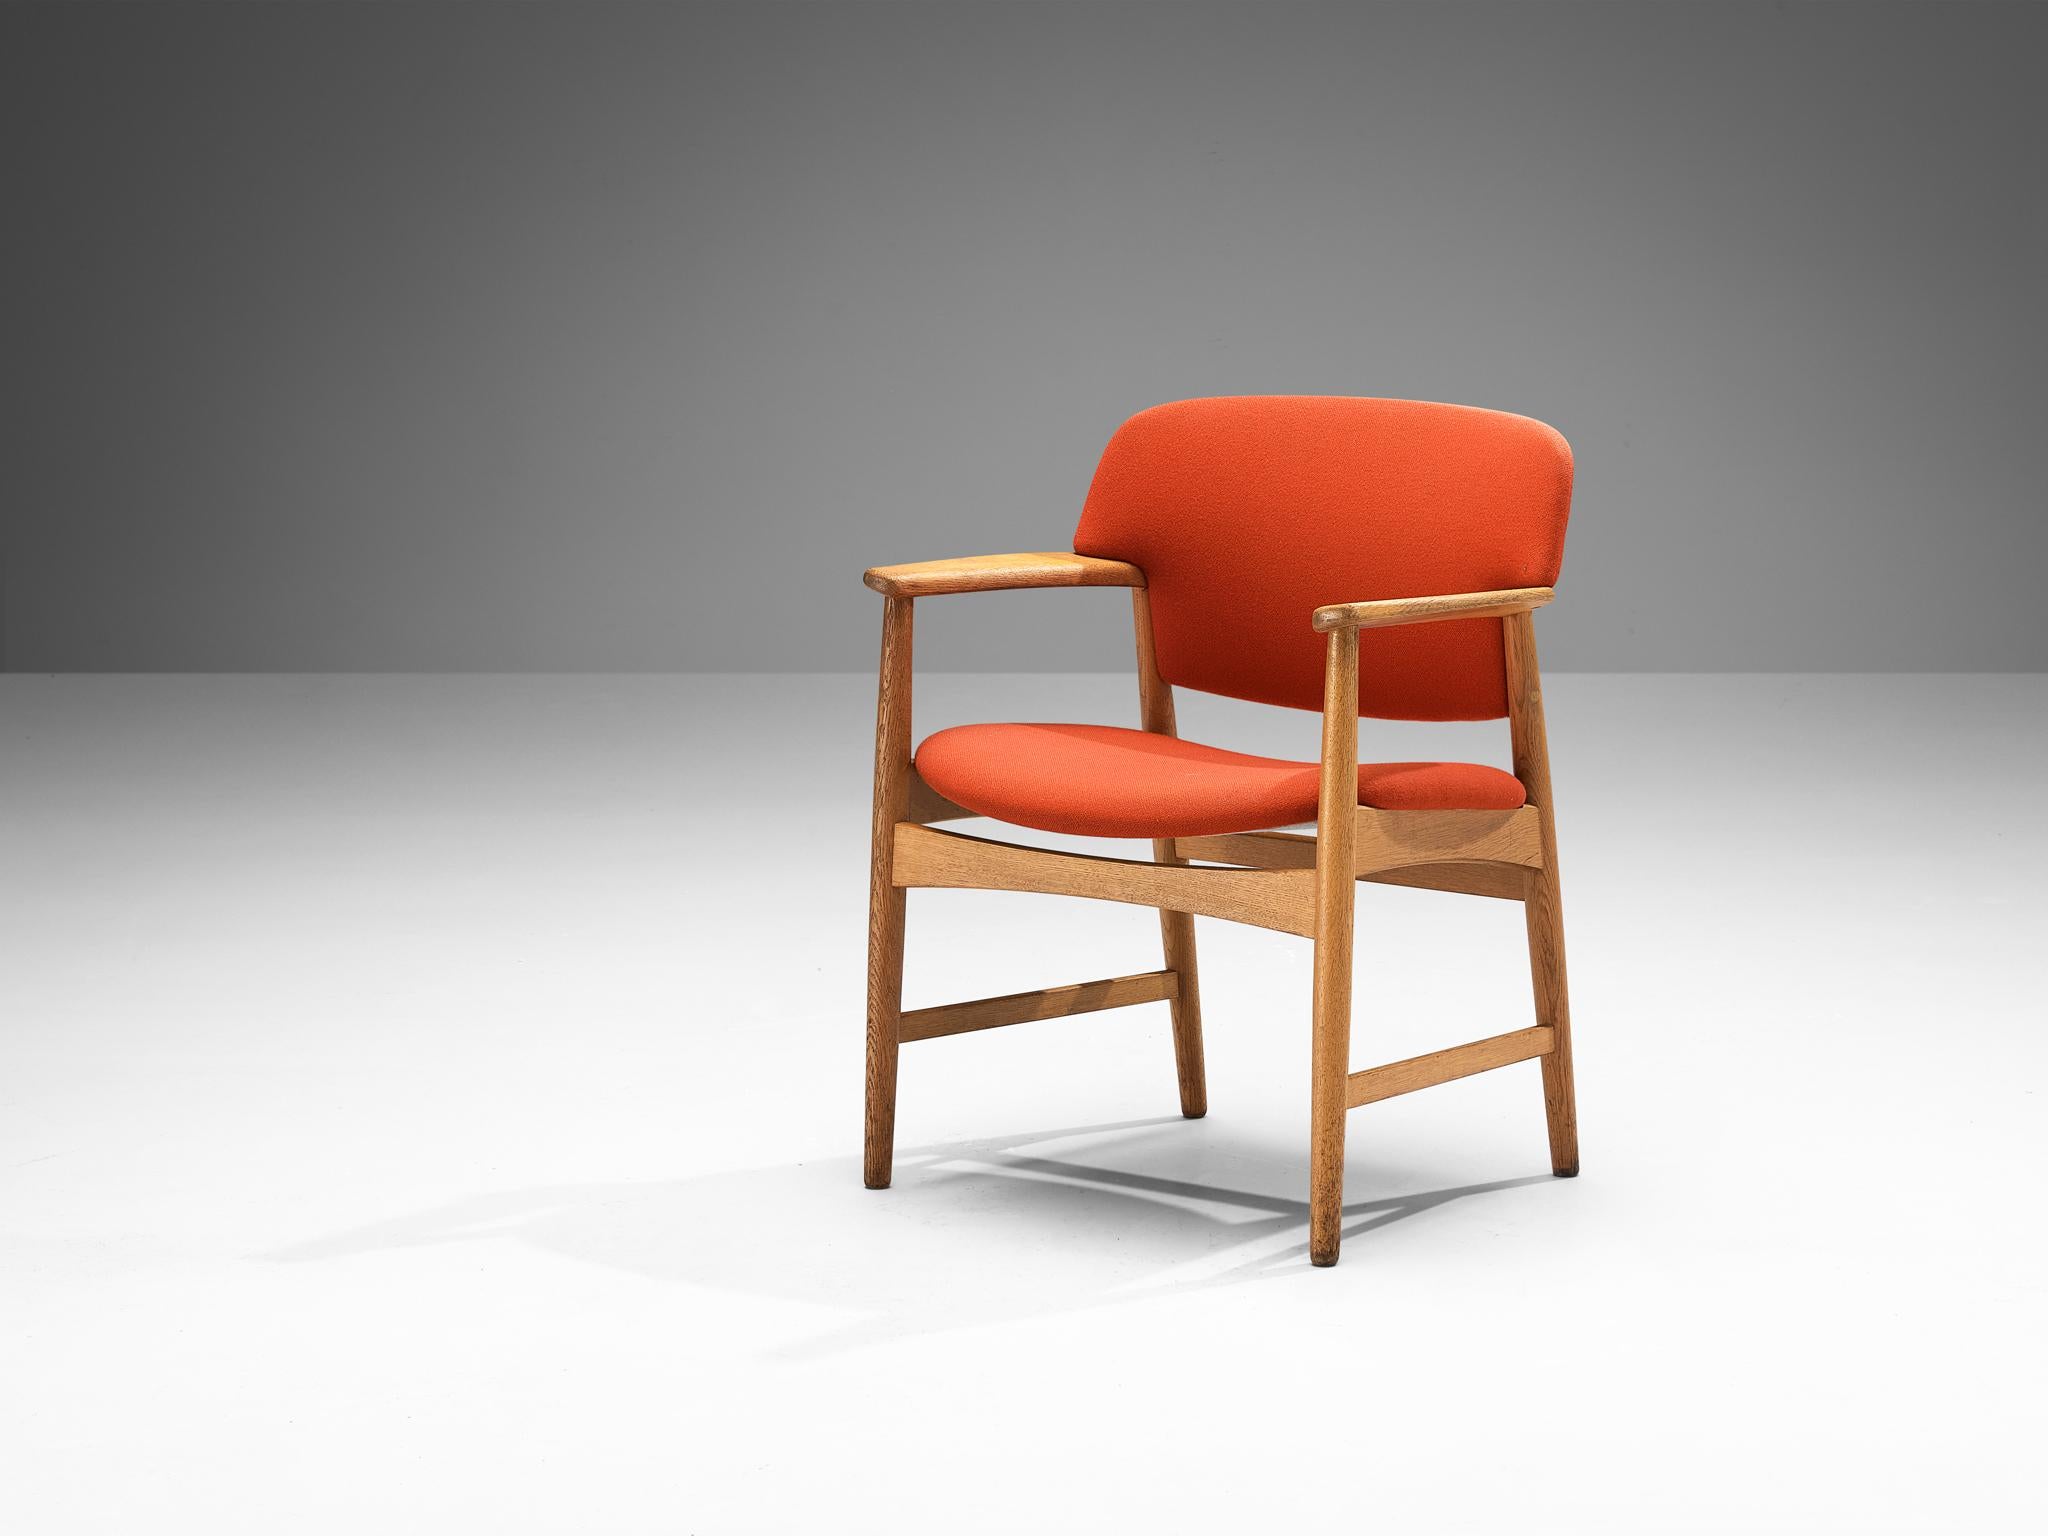 Einar Larsen & Aksel Bender-Madsen for Fritz Hansen, model 4205, orange upholstery, oak, Denmark, 1950s

This wide dining chair is executed with a rounded back. The chair features a blond oak frame and has rounded, soft edges. The interesting thing